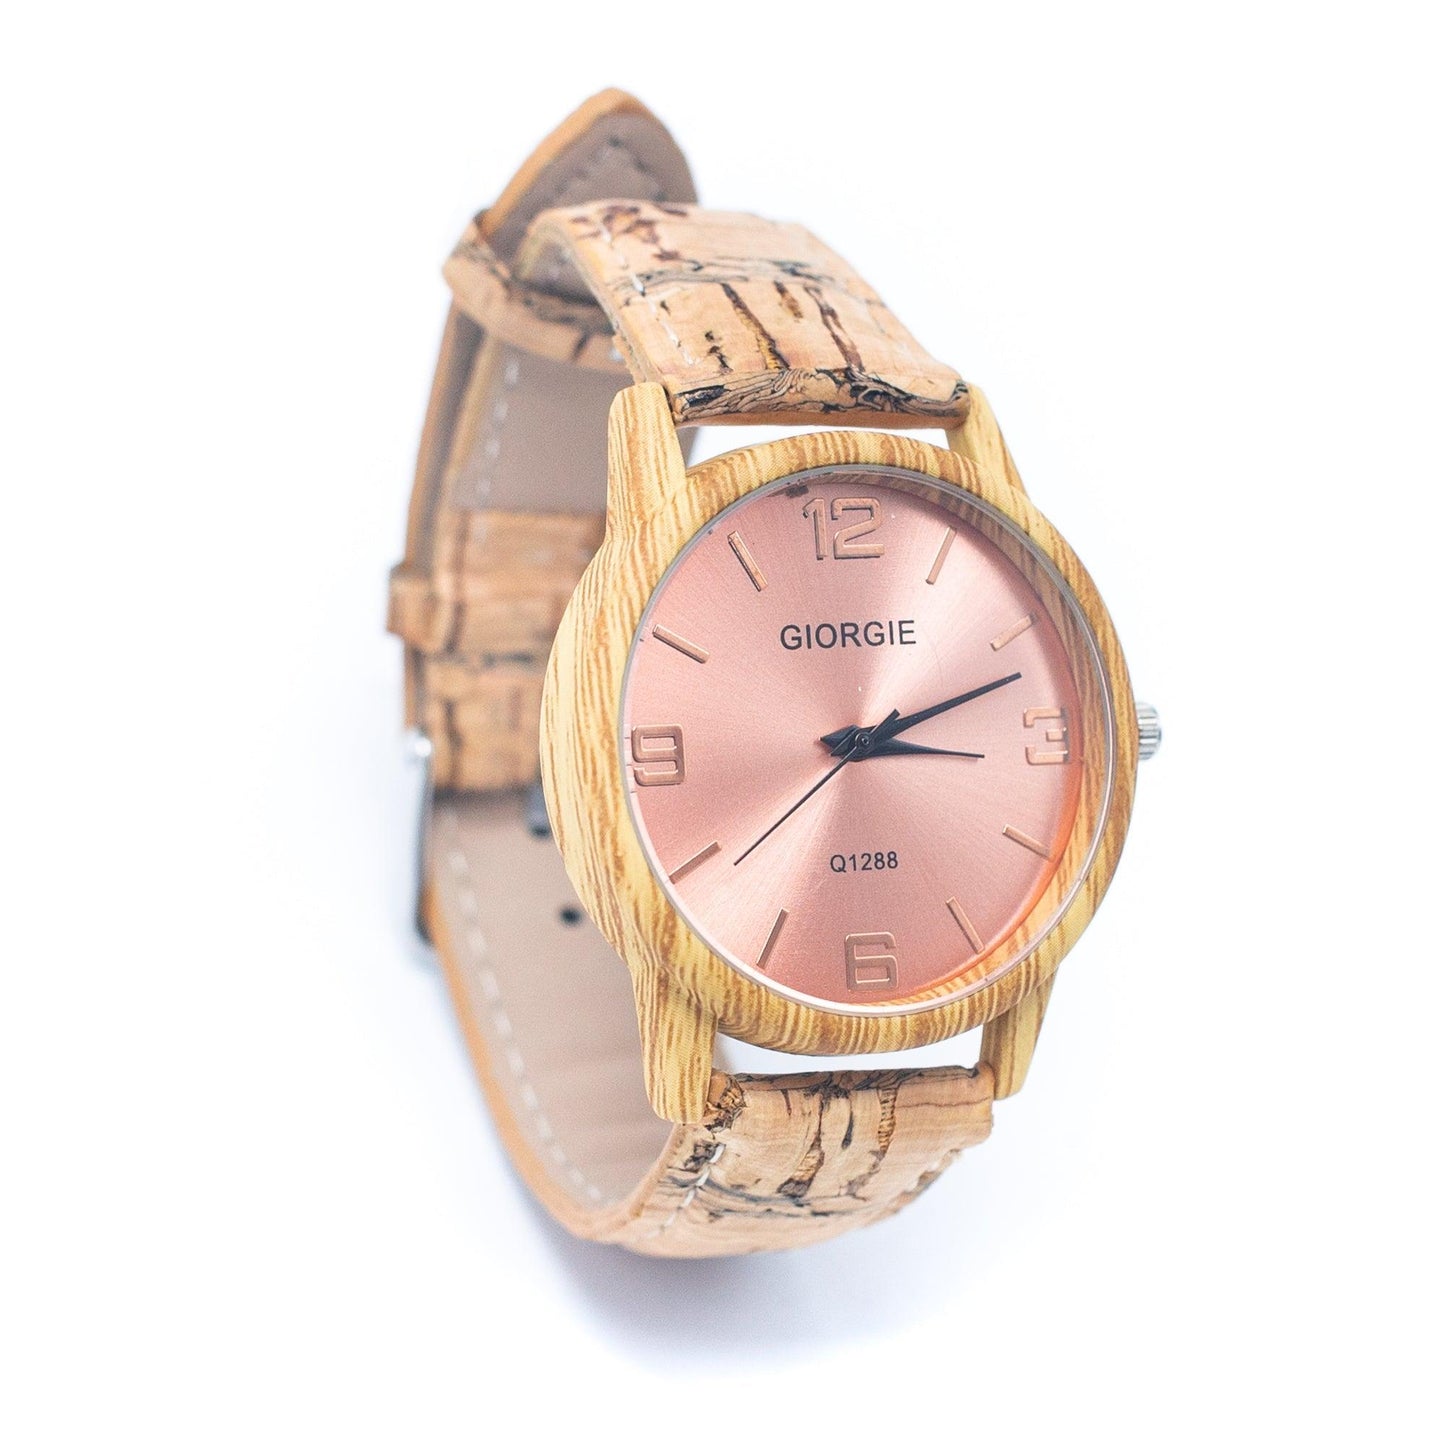 Cork Watch Collection - The Cork & Wood